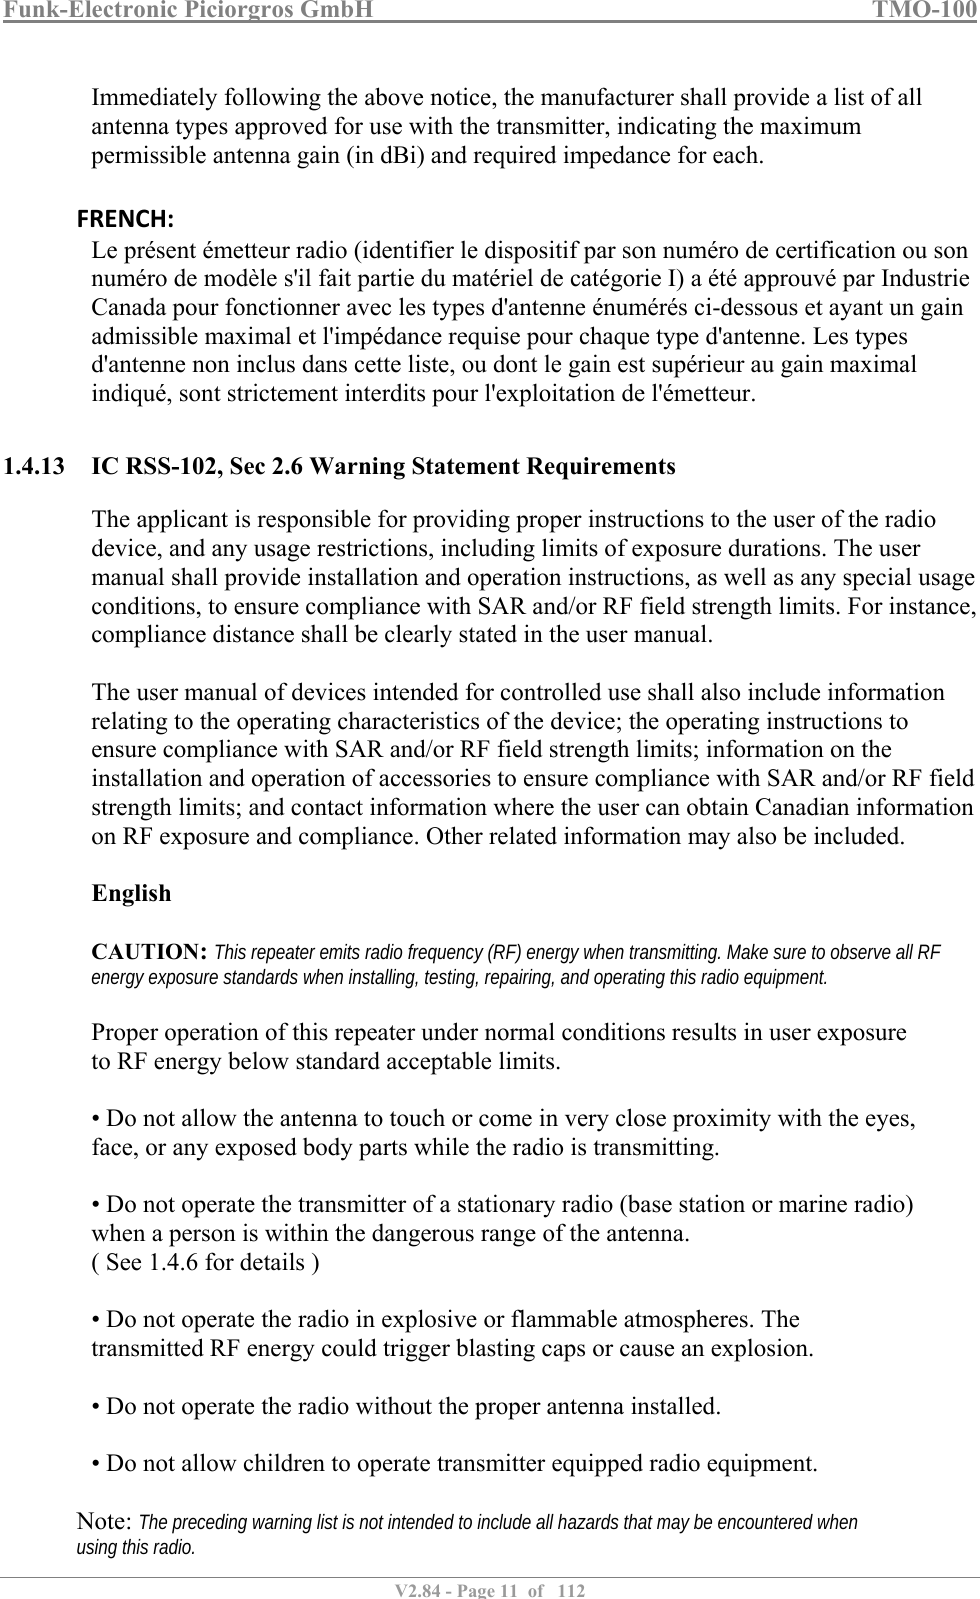 Funk-Electronic Piciorgros GmbH   TMO-100   V2.84 - Page 11  of   112   Immediately following the above notice, the manufacturer shall provide a list of all antenna types approved for use with the transmitter, indicating the maximum permissible antenna gain (in dBi) and required impedance for each. FRENCH: Le présent émetteur radio (identifier le dispositif par son numéro de certification ou son numéro de modèle s&apos;il fait partie du matériel de catégorie I) a été approuvé par Industrie Canada pour fonctionner avec les types d&apos;antenne énumérés ci-dessous et ayant un gain admissible maximal et l&apos;impédance requise pour chaque type d&apos;antenne. Les types d&apos;antenne non inclus dans cette liste, ou dont le gain est supérieur au gain maximal indiqué, sont strictement interdits pour l&apos;exploitation de l&apos;émetteur.  1.4.13 IC RSS-102, Sec 2.6 Warning Statement Requirements The applicant is responsible for providing proper instructions to the user of the radio device, and any usage restrictions, including limits of exposure durations. The user manual shall provide installation and operation instructions, as well as any special usage conditions, to ensure compliance with SAR and/or RF field strength limits. For instance, compliance distance shall be clearly stated in the user manual.  The user manual of devices intended for controlled use shall also include information relating to the operating characteristics of the device; the operating instructions to ensure compliance with SAR and/or RF field strength limits; information on the installation and operation of accessories to ensure compliance with SAR and/or RF field strength limits; and contact information where the user can obtain Canadian information on RF exposure and compliance. Other related information may also be included.  English  CAUTION: This repeater emits radio frequency (RF) energy when transmitting. Make sure to observe all RF energy exposure standards when installing, testing, repairing, and operating this radio equipment.  Proper operation of this repeater under normal conditions results in user exposure to RF energy below standard acceptable limits.  • Do not allow the antenna to touch or come in very close proximity with the eyes, face, or any exposed body parts while the radio is transmitting.  • Do not operate the transmitter of a stationary radio (base station or marine radio) when a person is within the dangerous range of the antenna. ( See 1.4.6 for details )  • Do not operate the radio in explosive or flammable atmospheres. The transmitted RF energy could trigger blasting caps or cause an explosion.  • Do not operate the radio without the proper antenna installed.  • Do not allow children to operate transmitter equipped radio equipment.    Note: The preceding warning list is not intended to include all hazards that may be encountered when using this radio.  